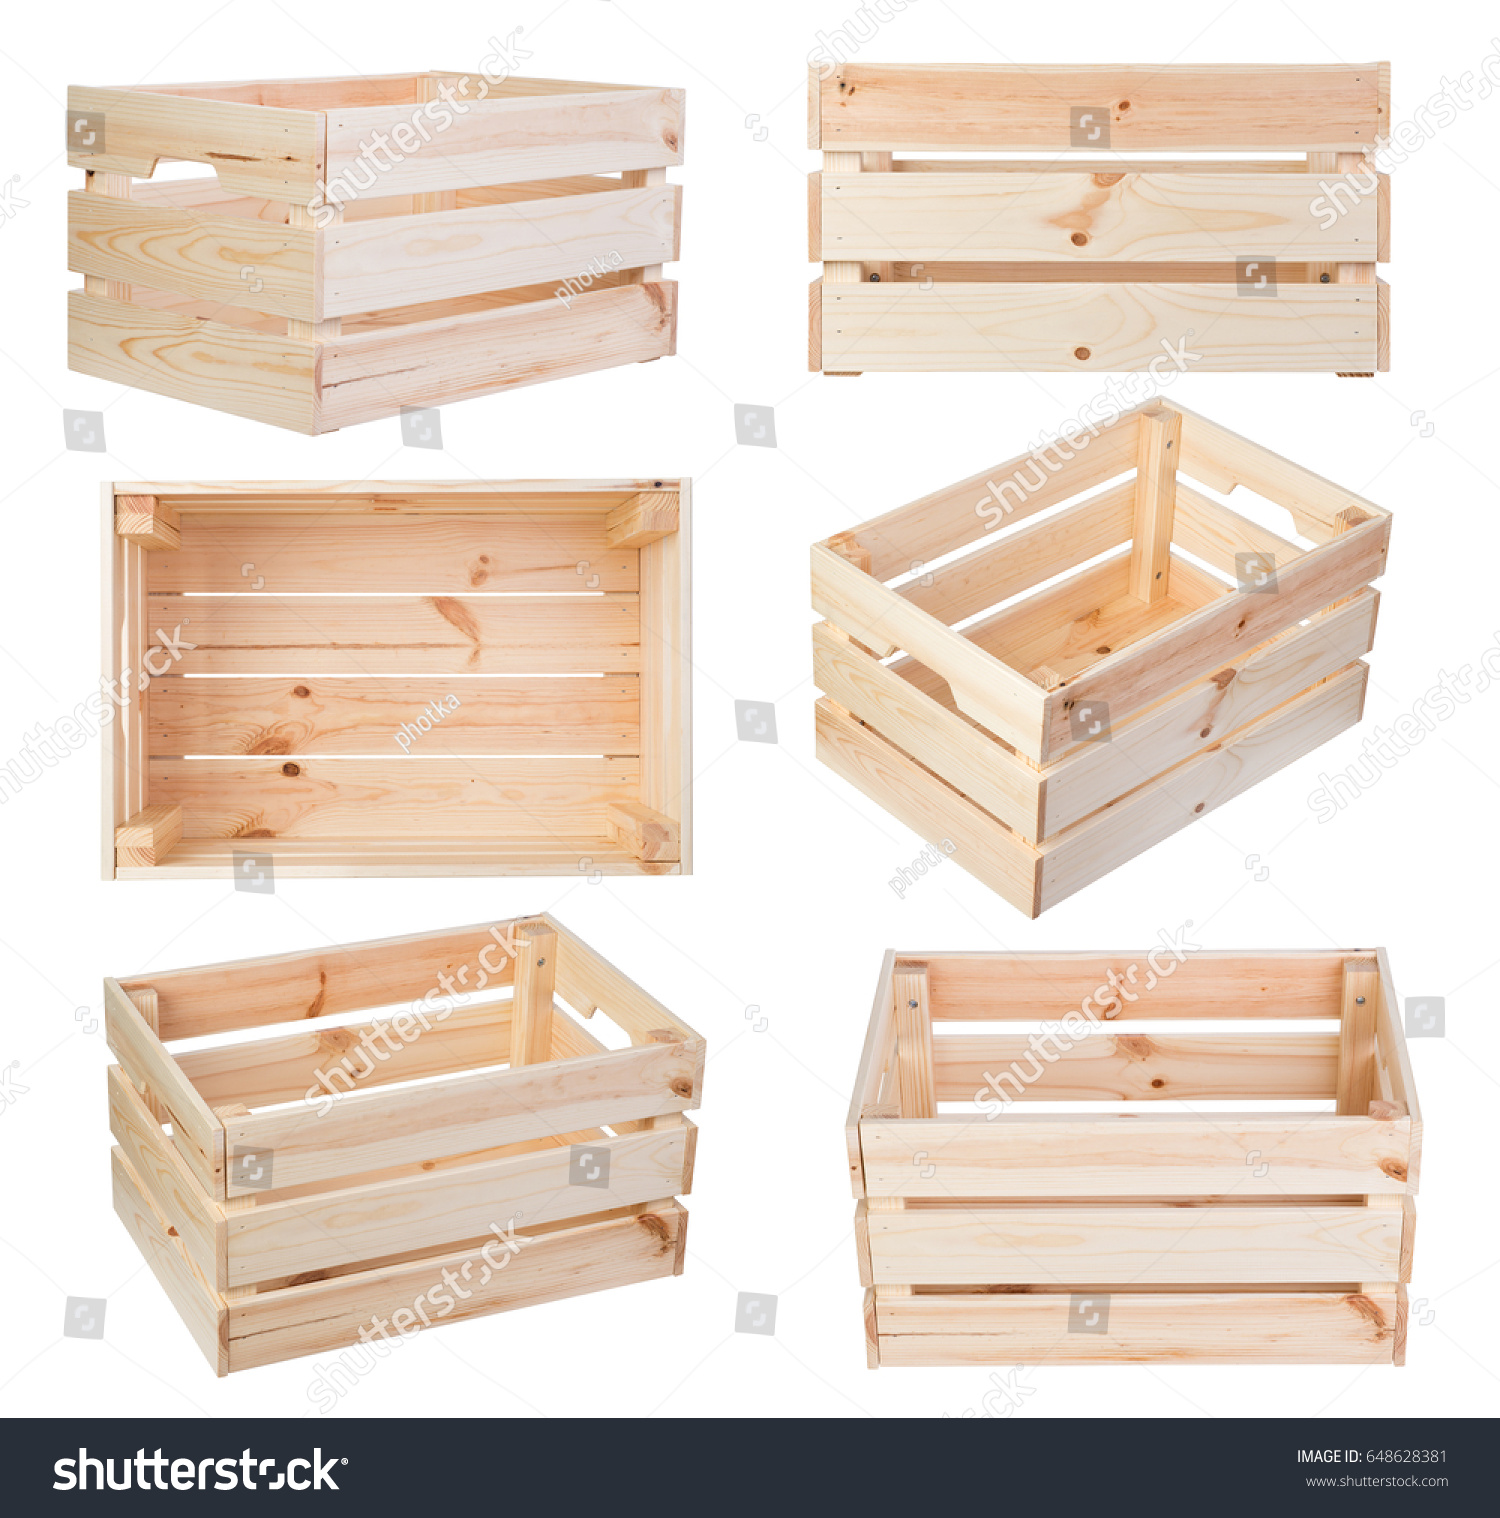 Wooden boxes isolated on white background #648628381